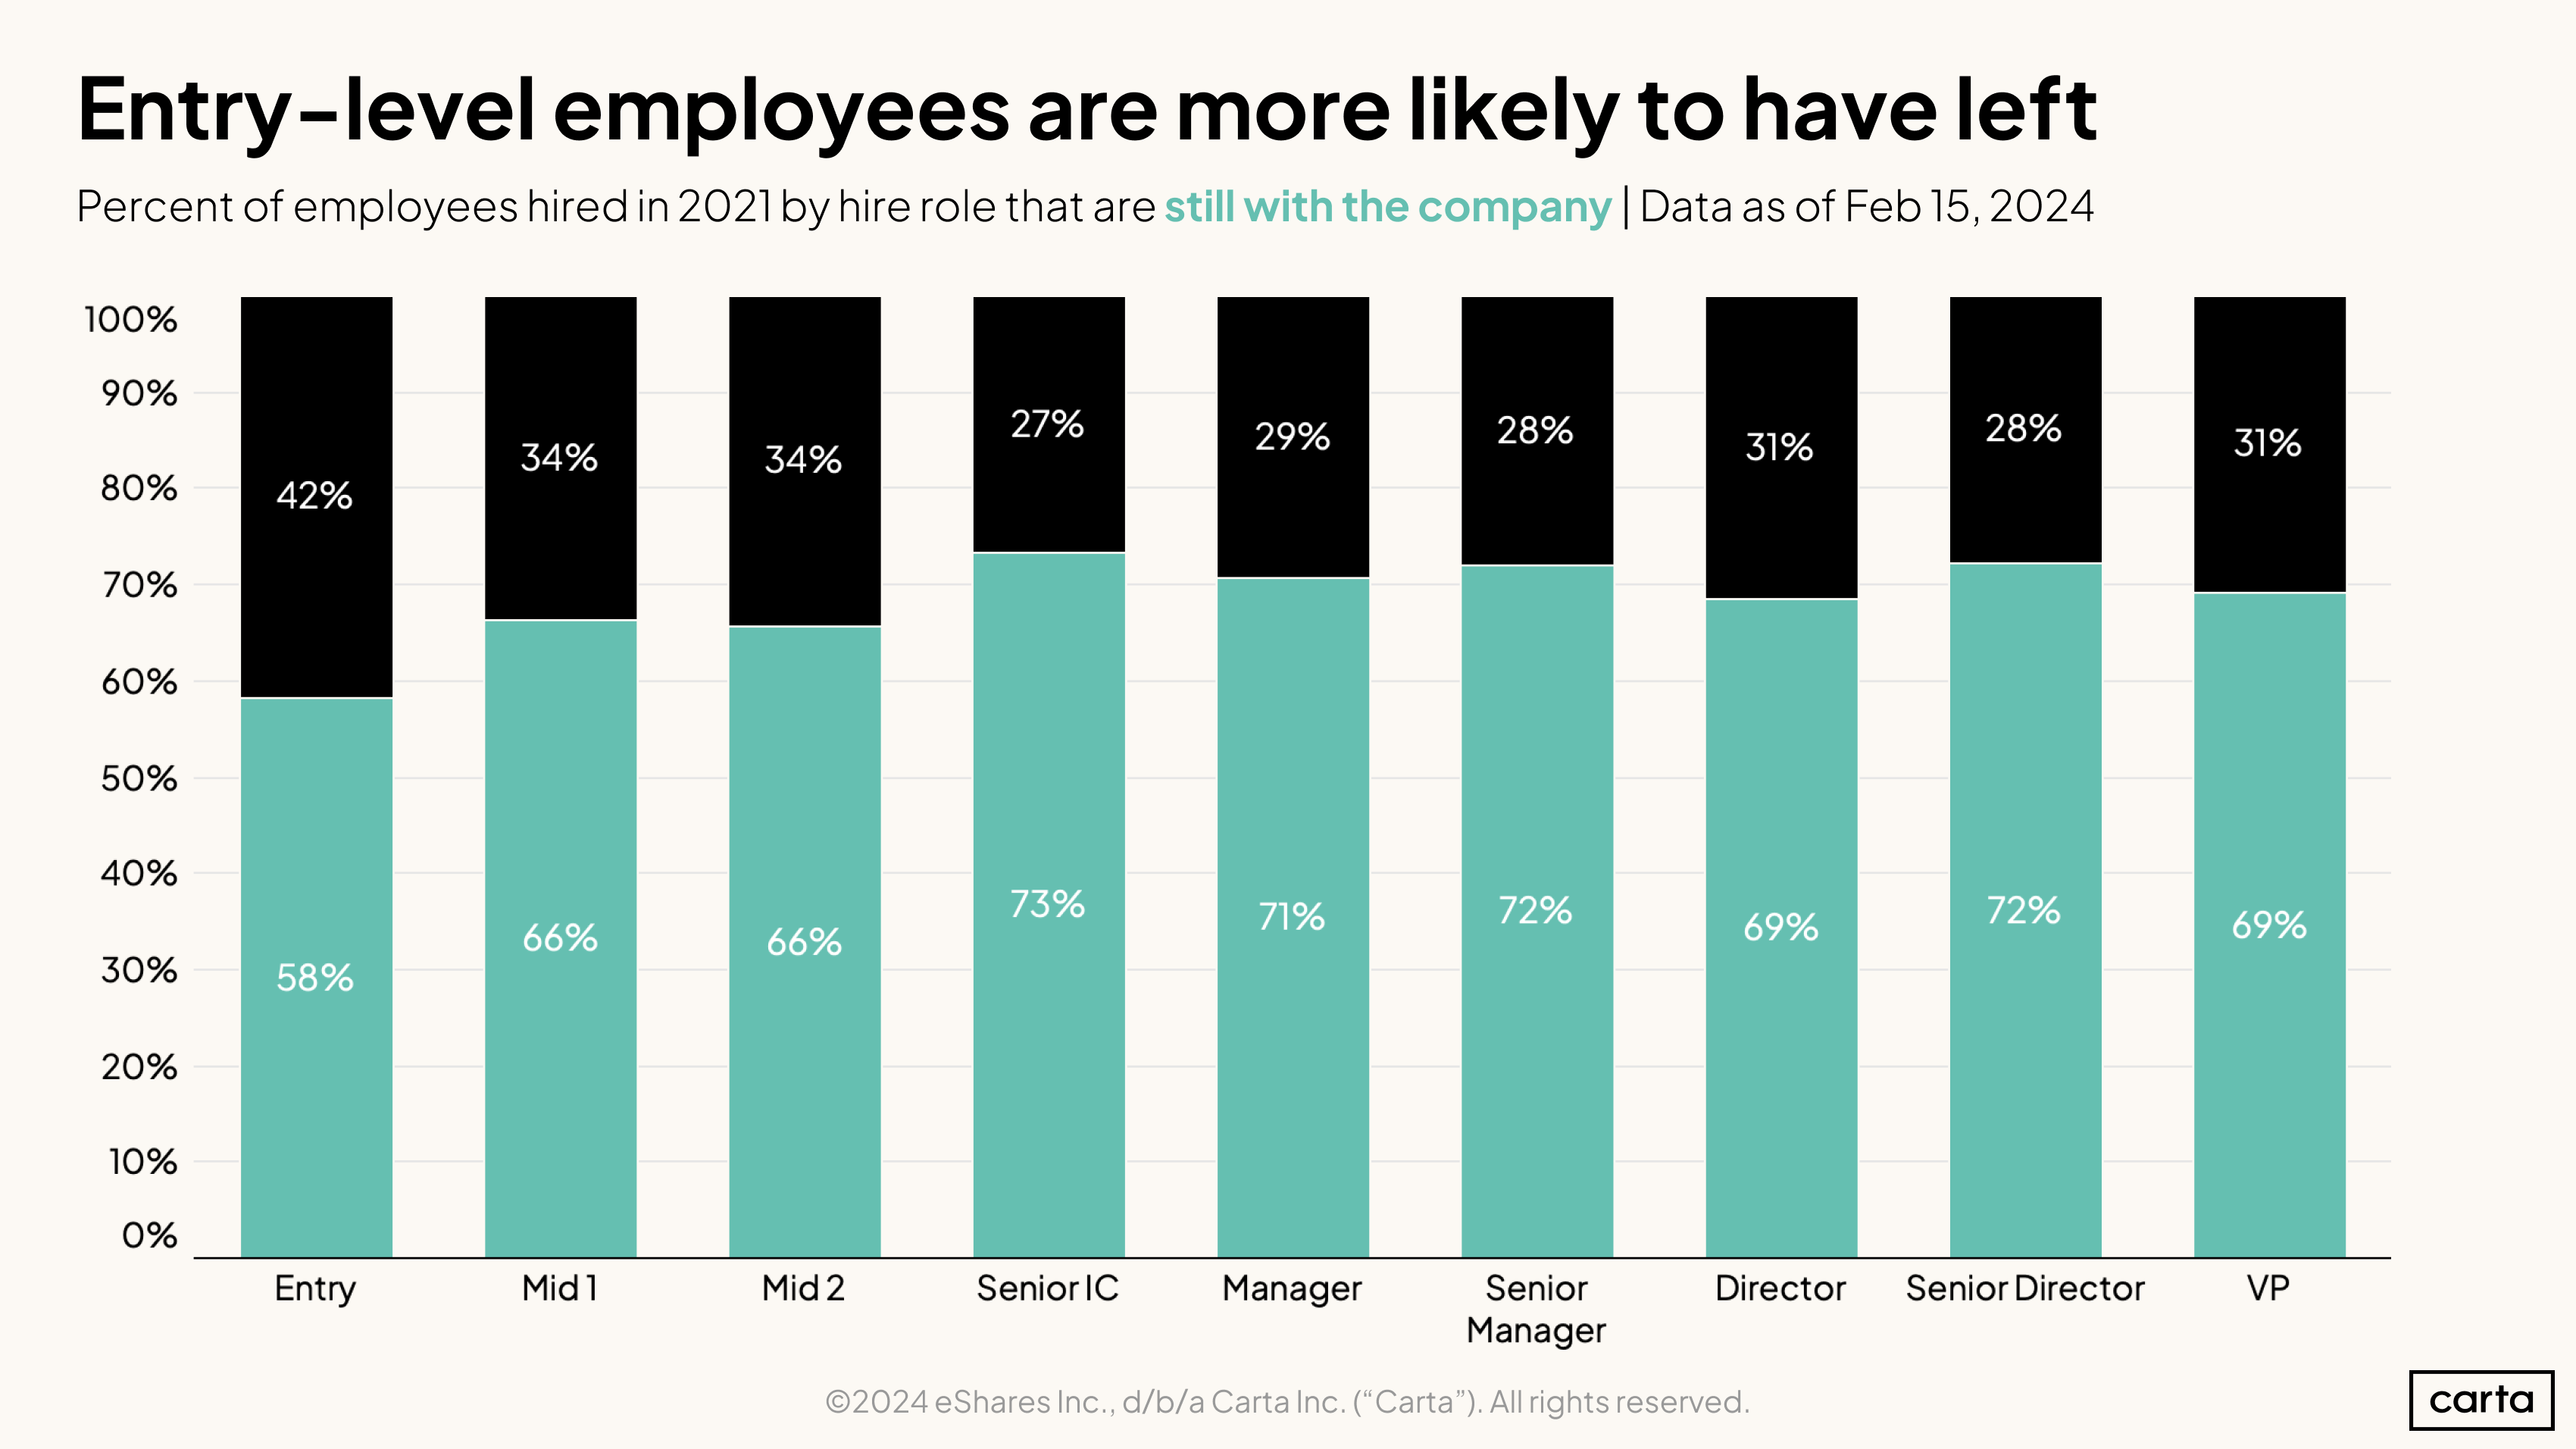 Entry-level employees are more likely to have left